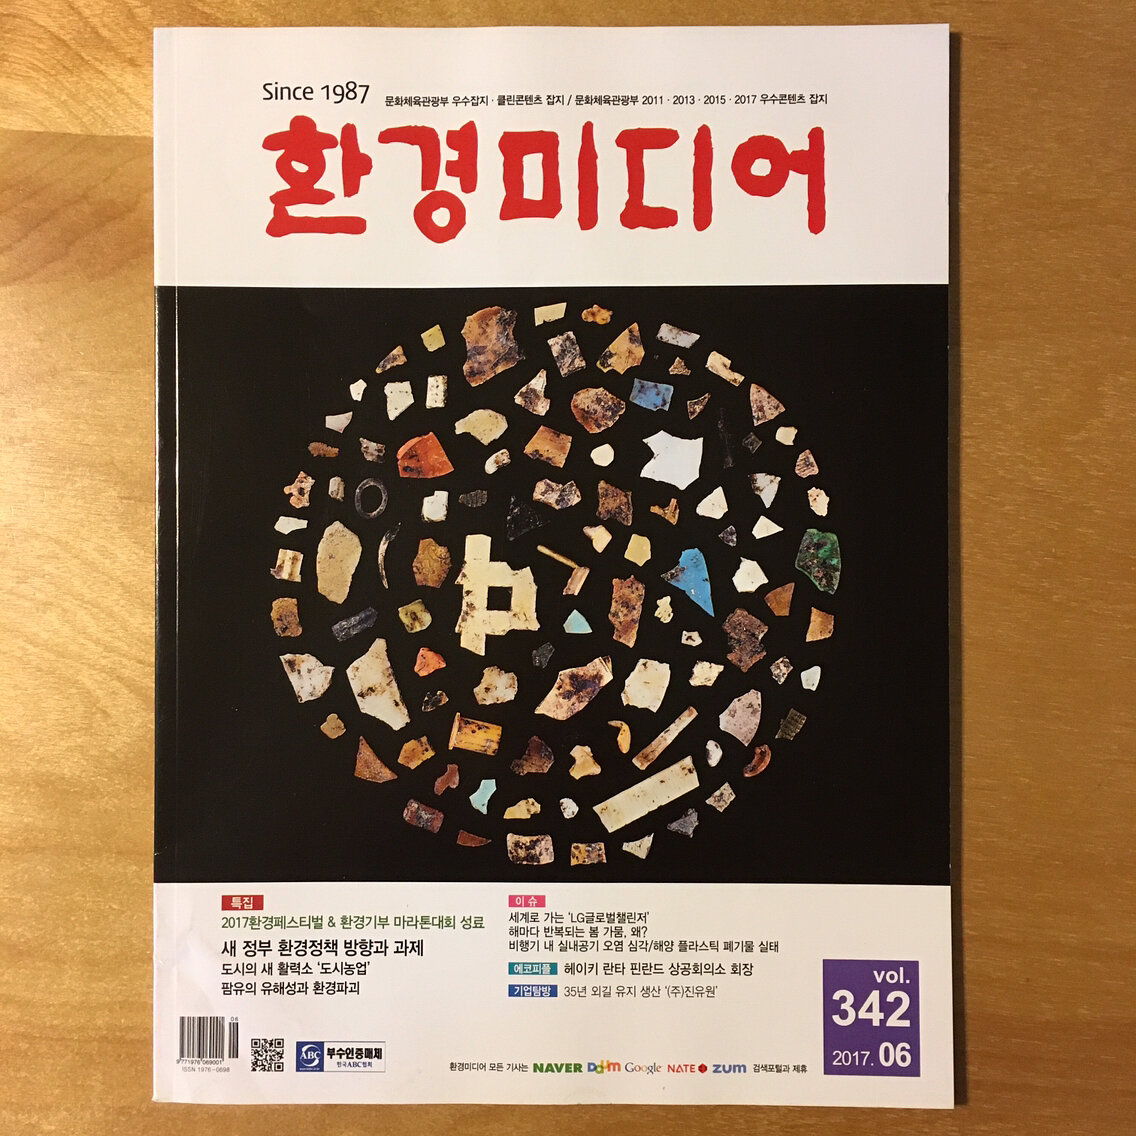 Thank you ECOMEDIA Korea for featuring my #PLASTIK photo series and for choosing one of the images for the cover! #plastic #plasticocean #cleanocean #algalita #plasticpollutioncoalition #plasticart #oceanplastic #marineplastic #marinedebris #cleanbea